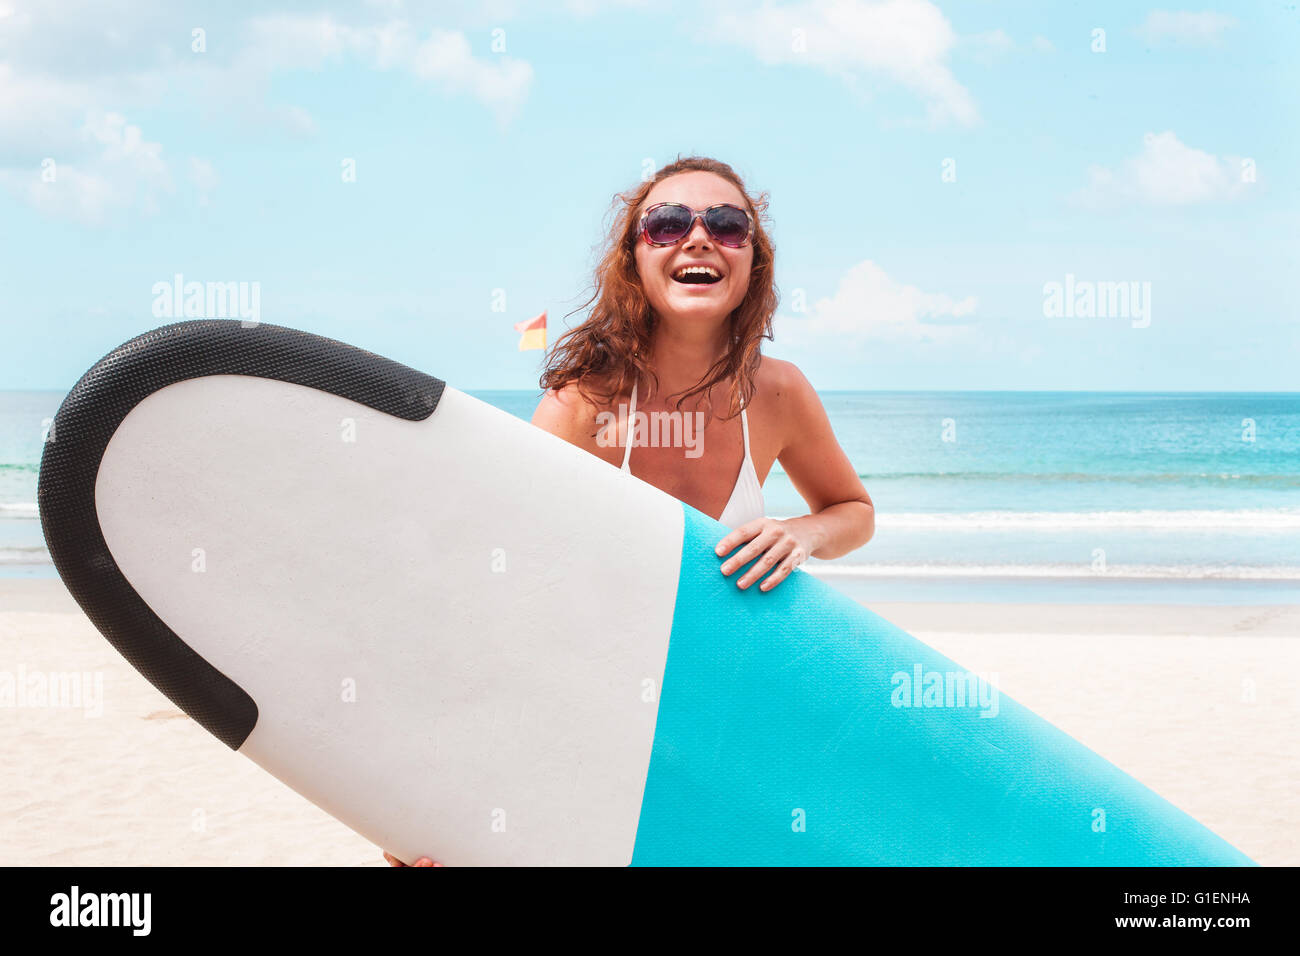 Girl on the waves with surfboard. Stock Photo